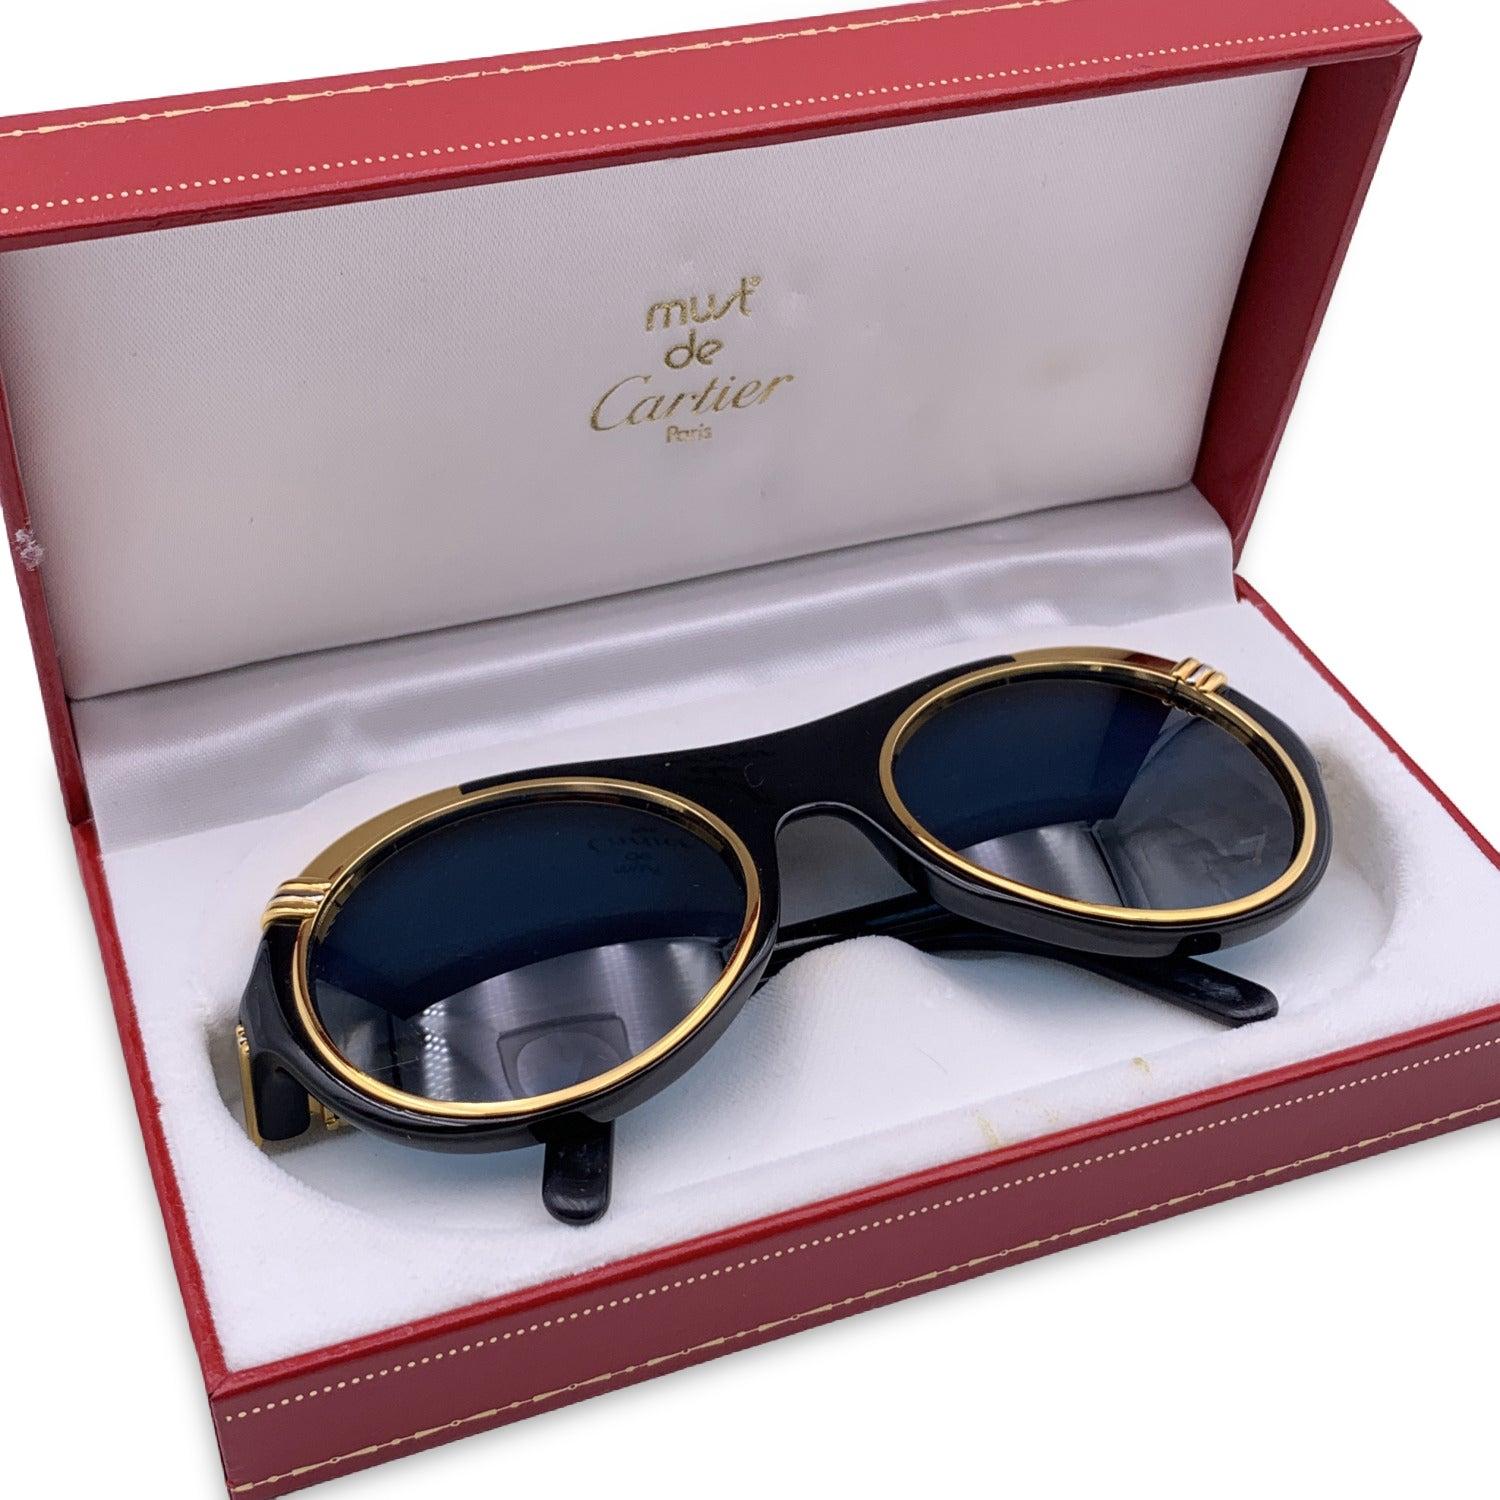 Vintage rare CARTIER Paris - DIABOLO. Very rare Sunglasses from the 1991. Black round acetate frame and 18K Gold accents. Serial reference: 1007185. New 100% UV protection lenses in blue color. They will come with its original CARTIER red case. Made